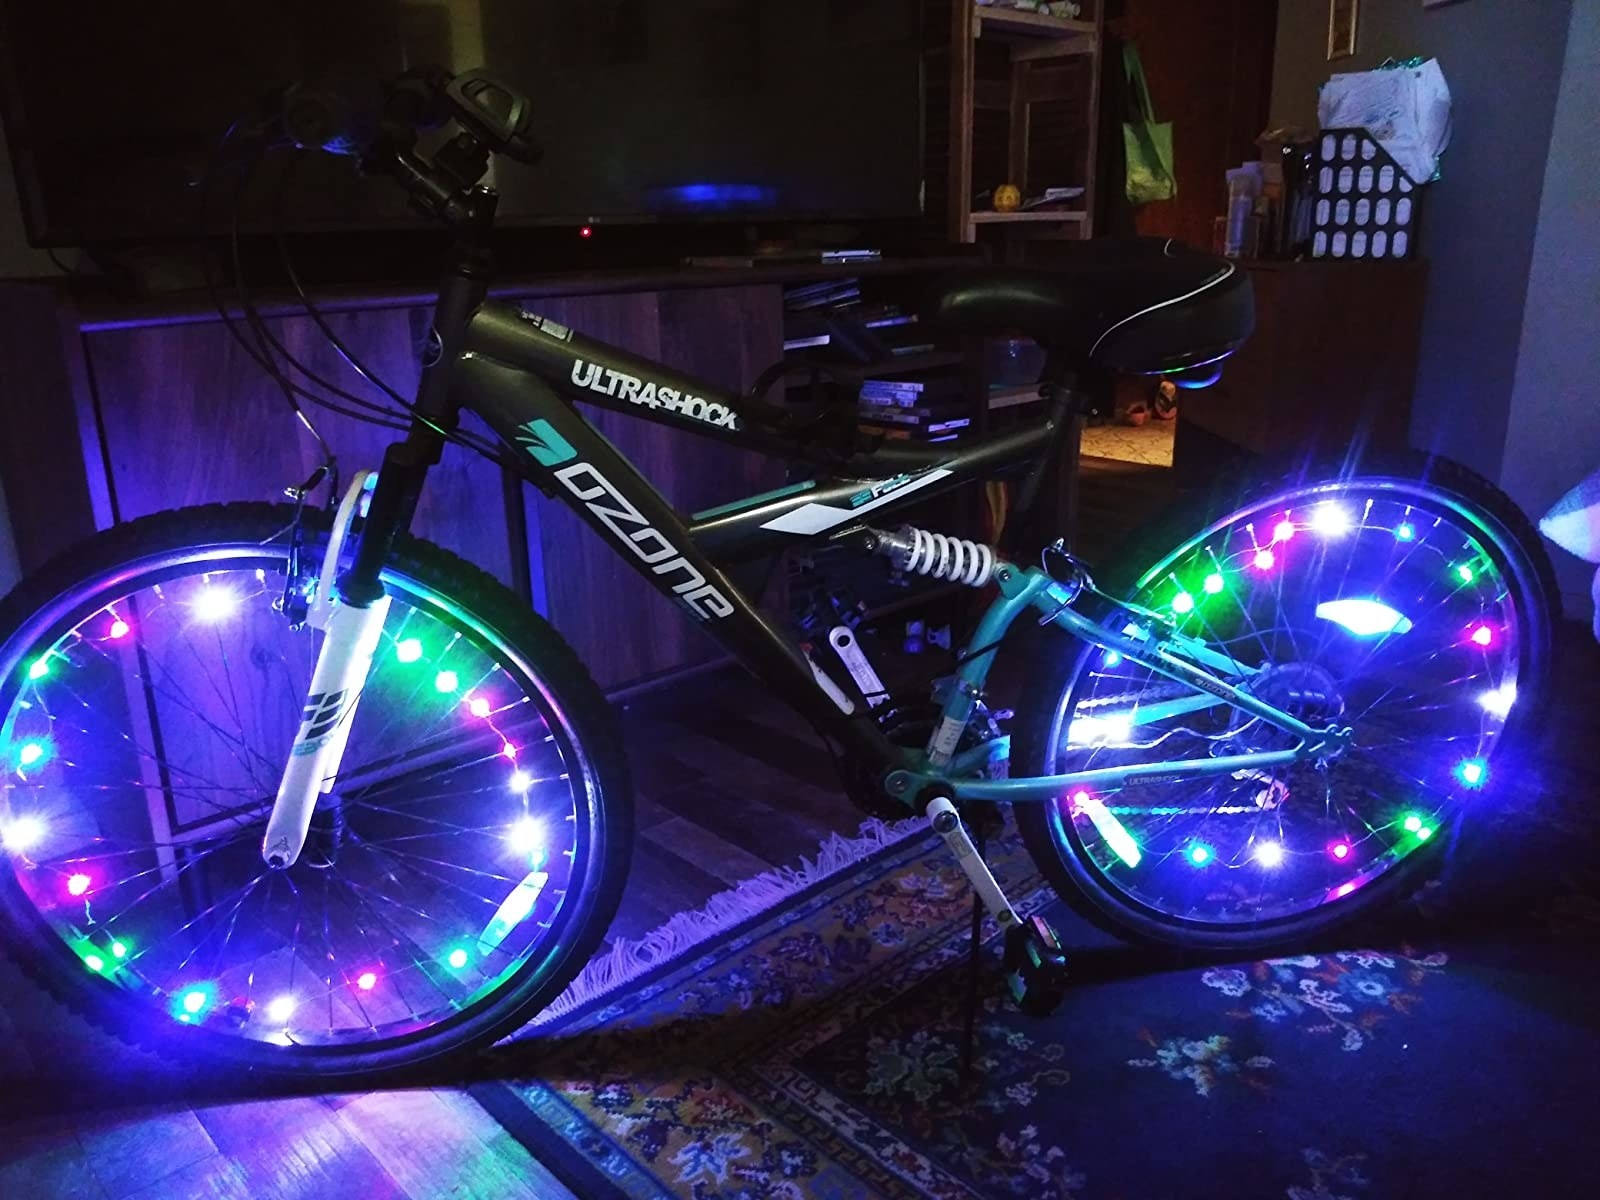 Bicycle with lights around the wheels